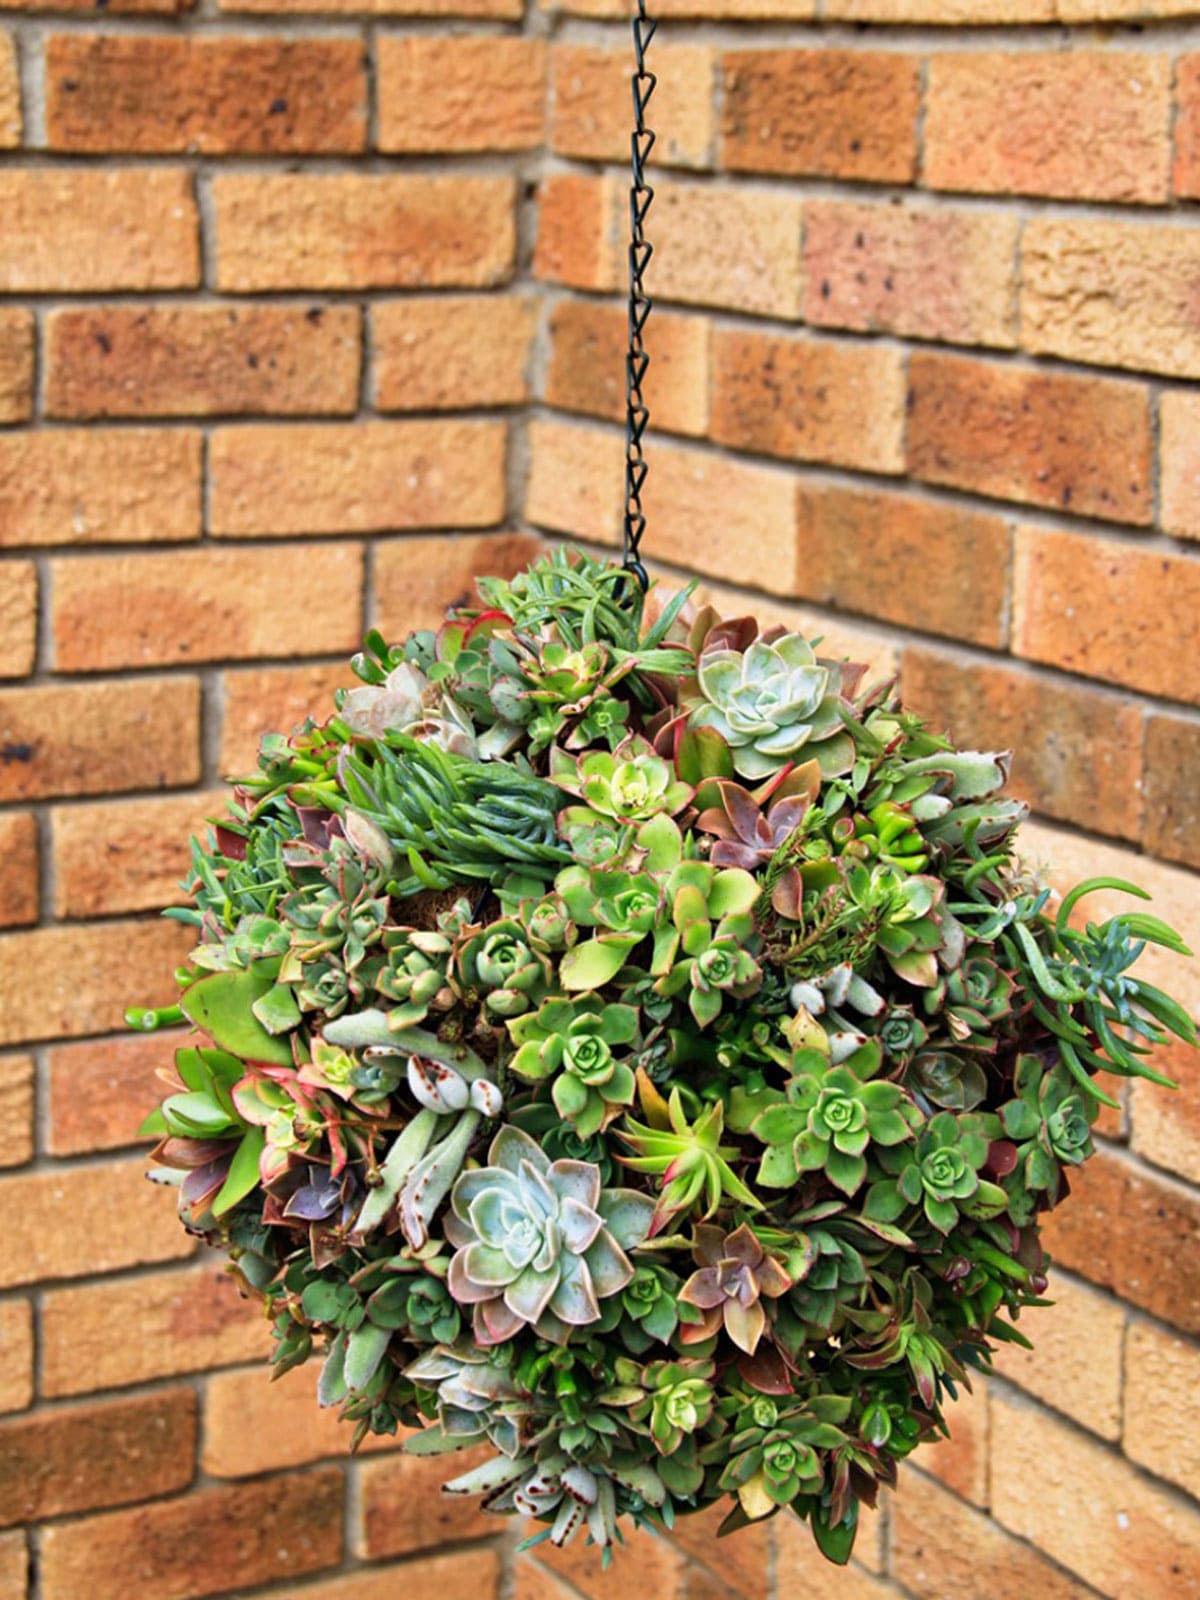 25 fascinating ideas to build a hanging mini succulent garden - 83